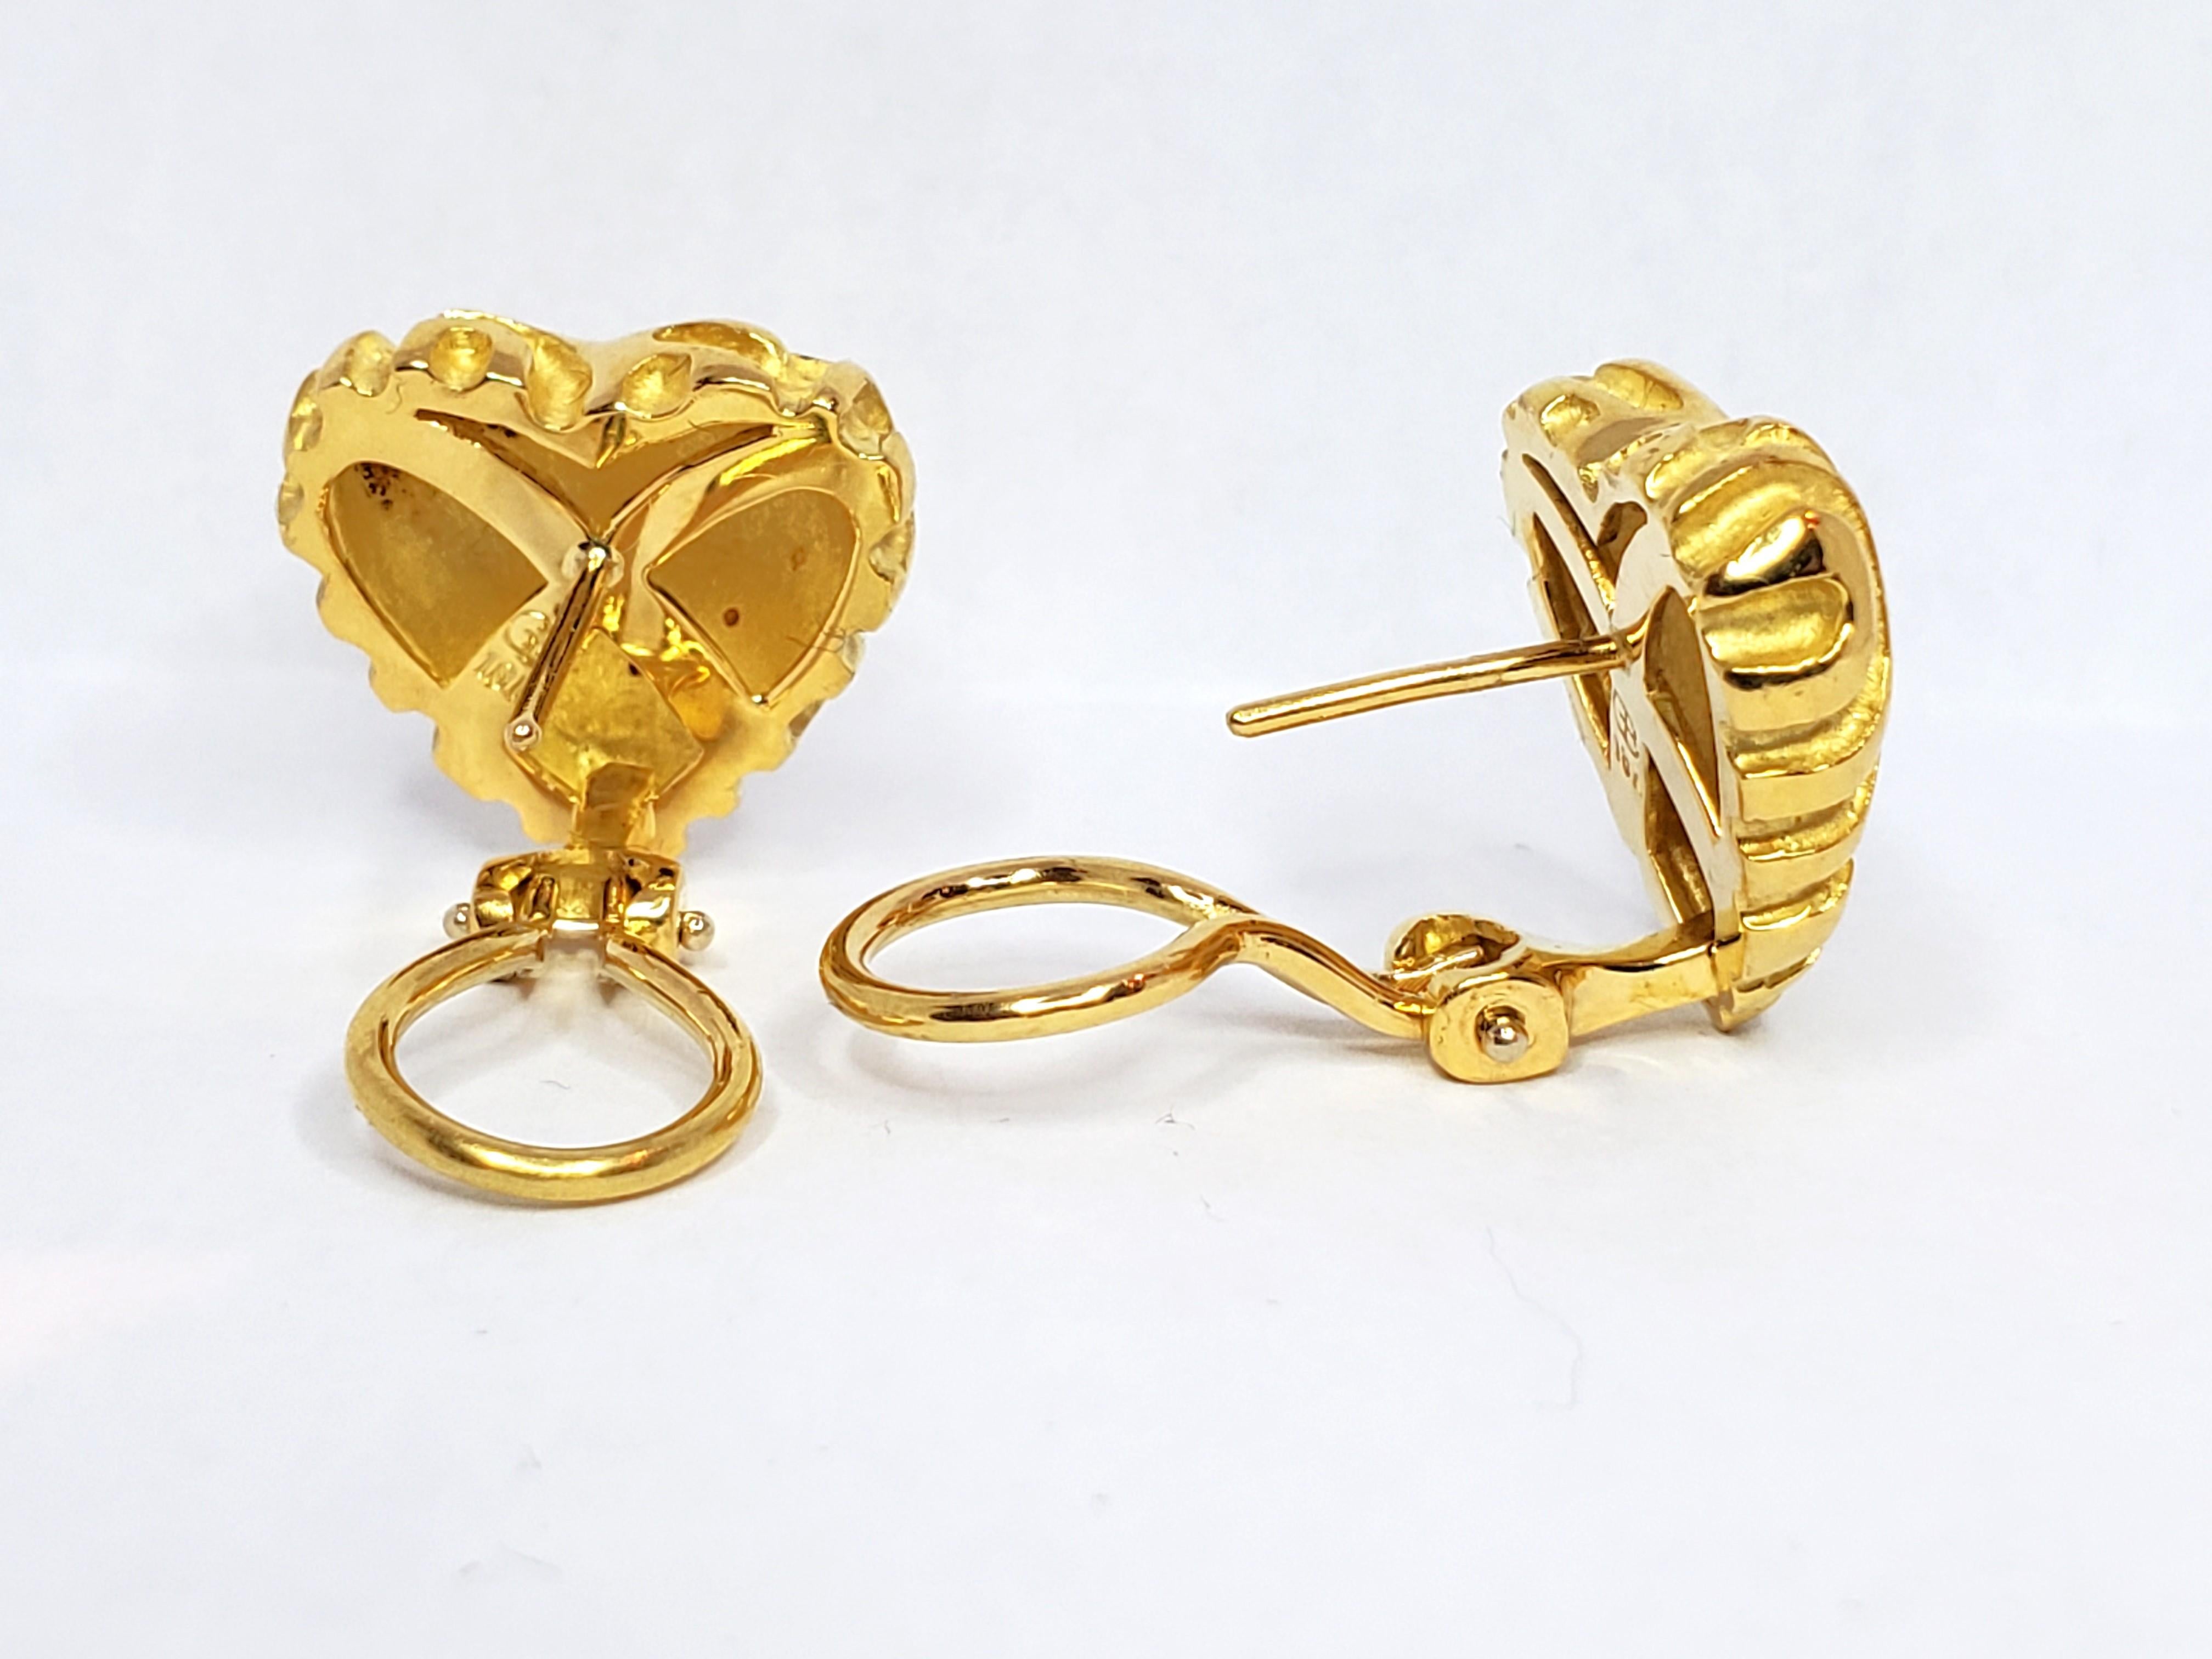 Contemporary Carved Heart Earrings in 18k Gold, by Gloria Bass Design For Sale